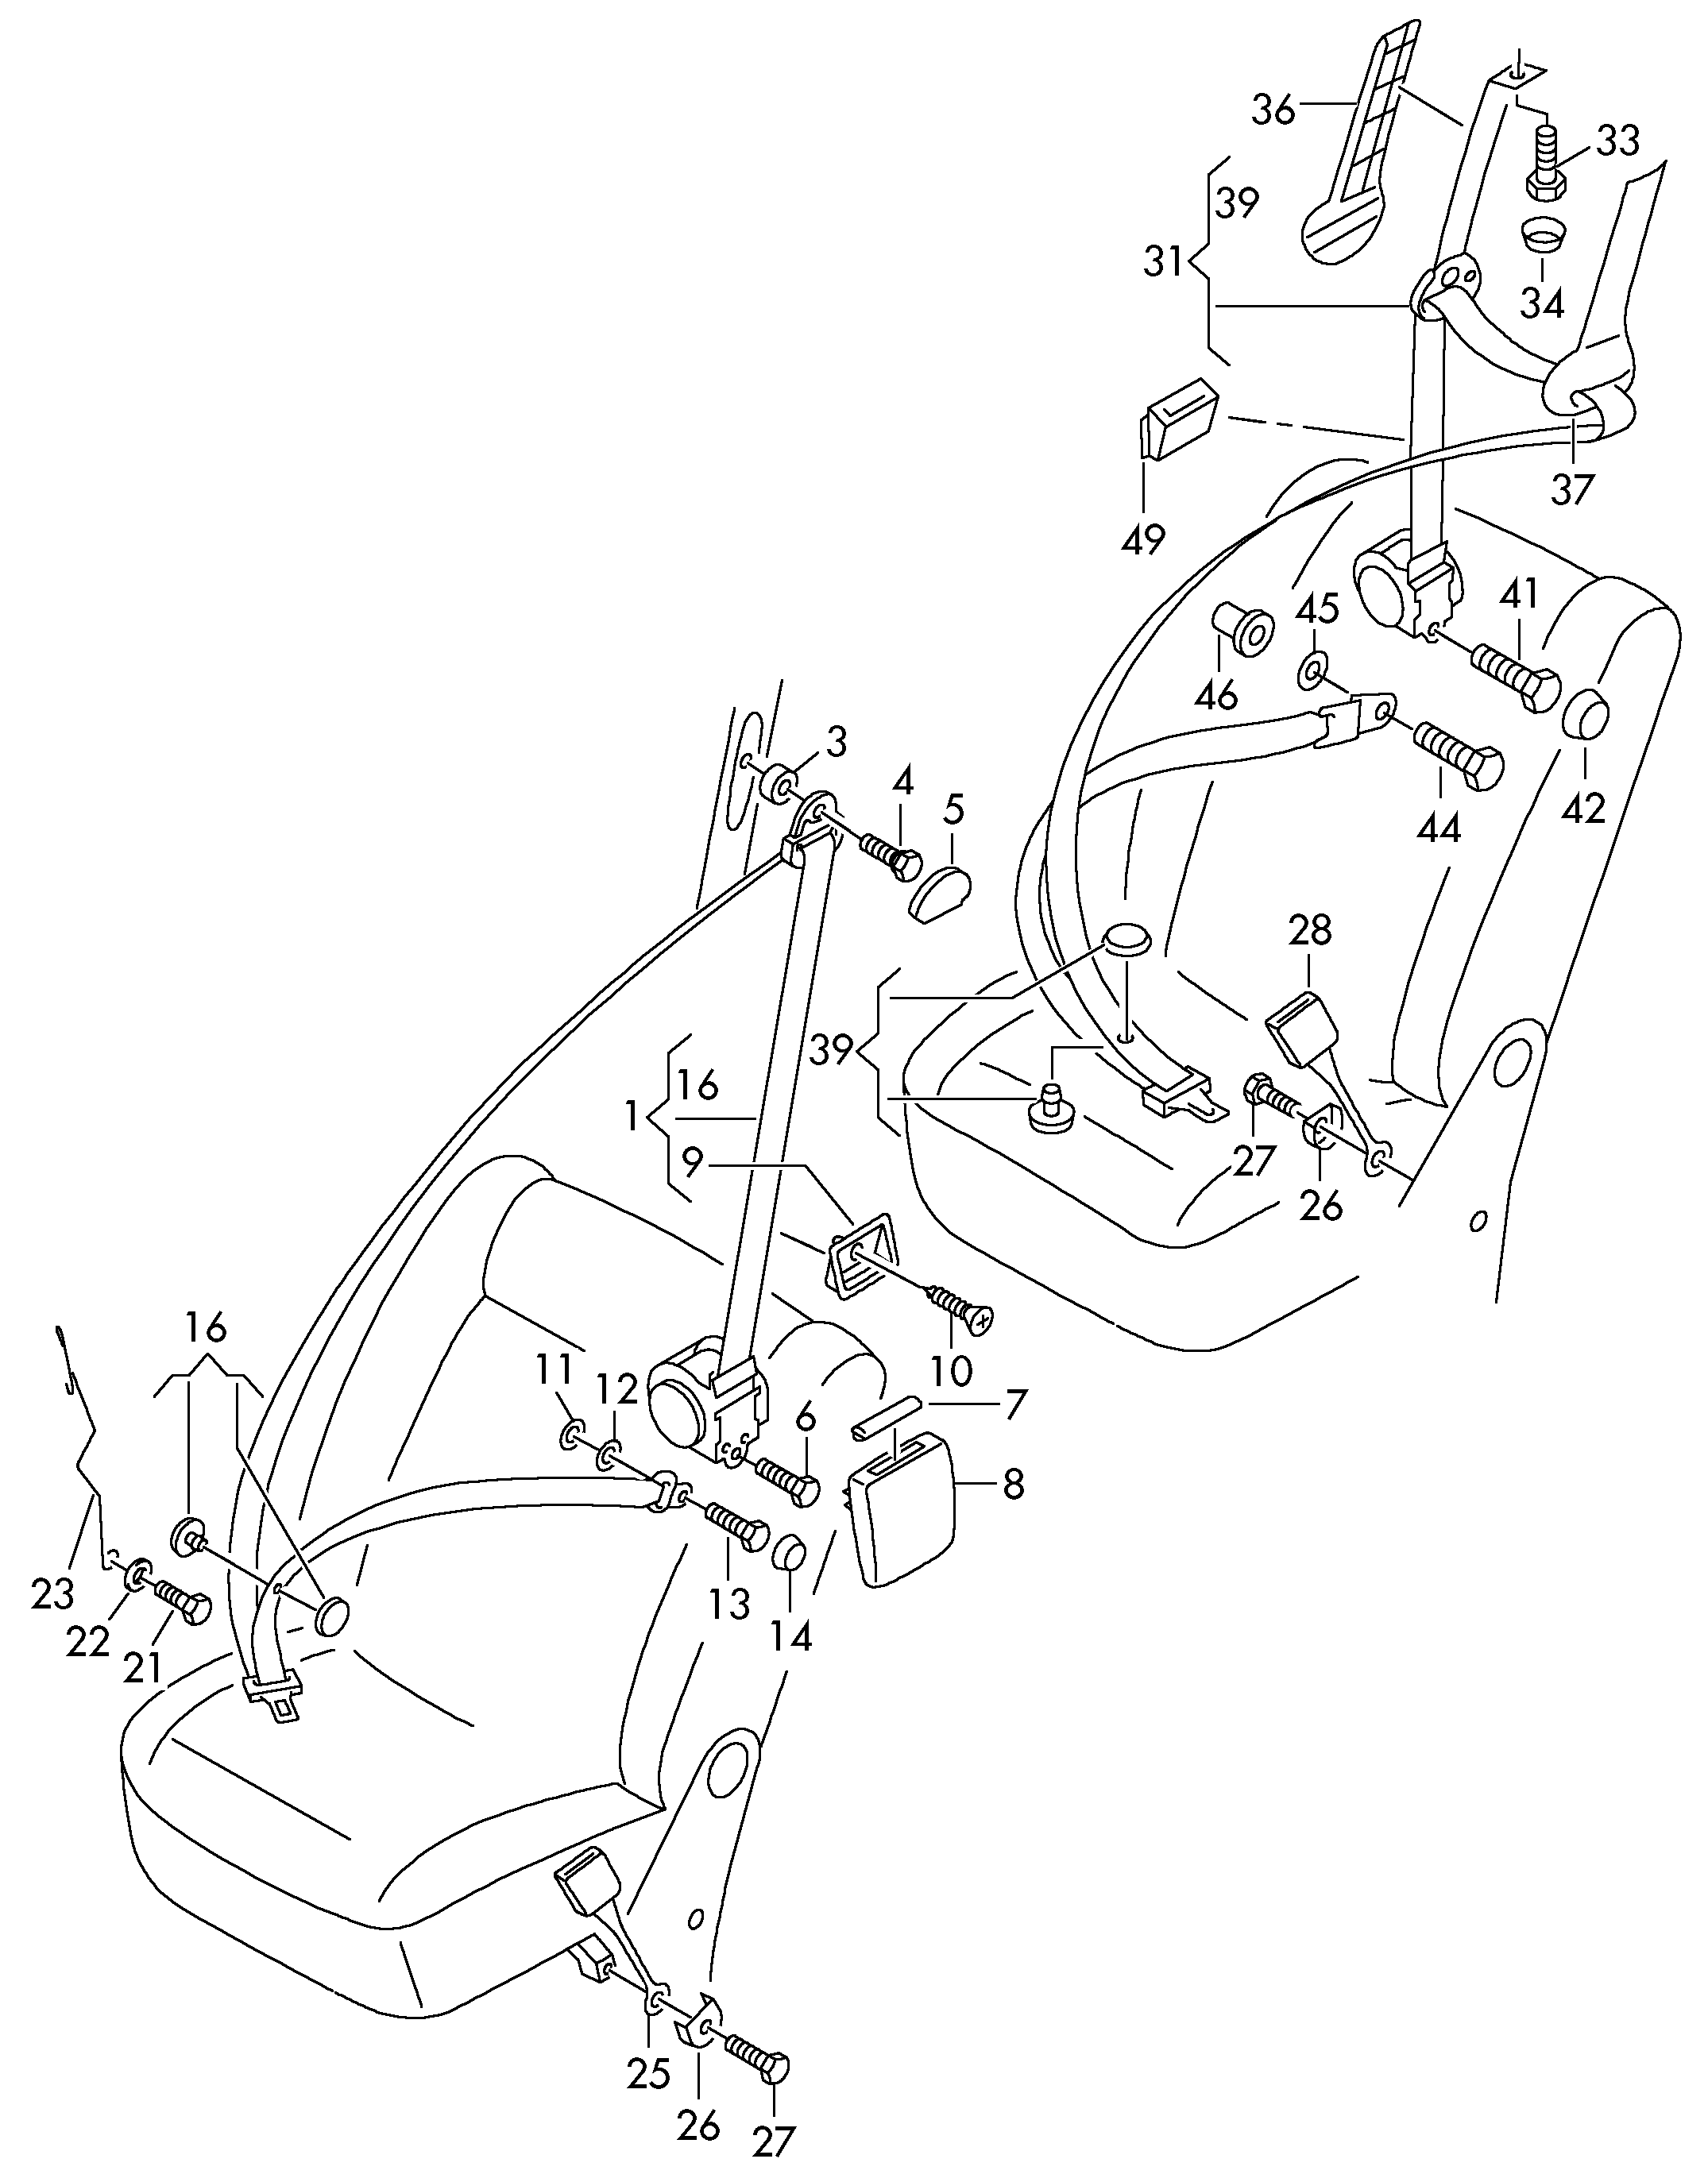 Three-point safety beltfor passenger compartementfor vehicle with individual<br>seats 2. seat bench - Transporter syncro - trsy